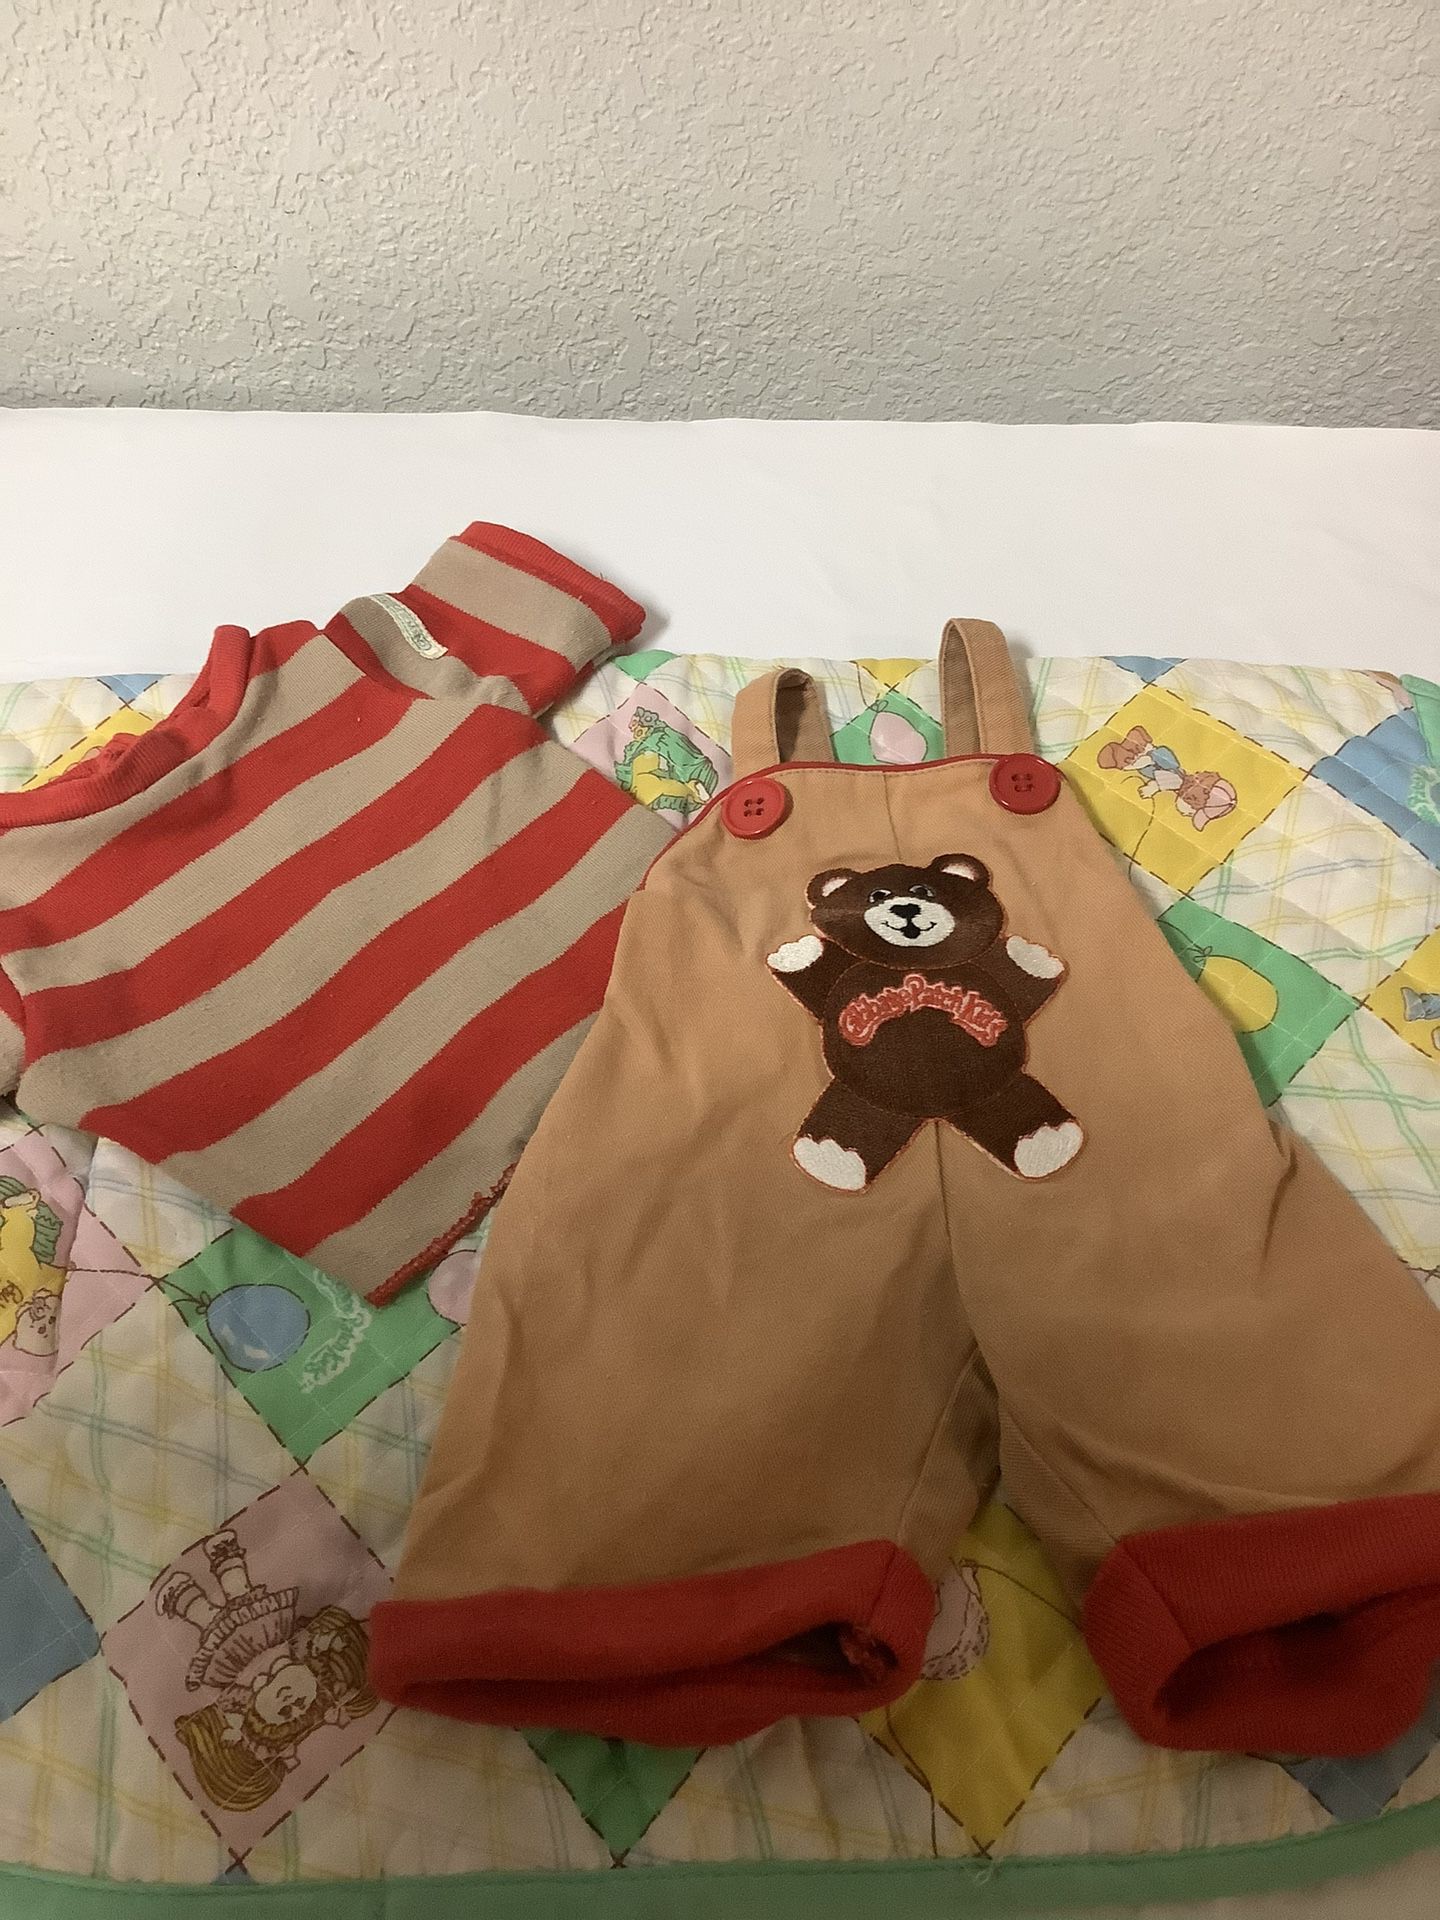 Vintage Cabbage Patch Kids Teddy Bear Overalls And Matching Shirt Harder To Find Color